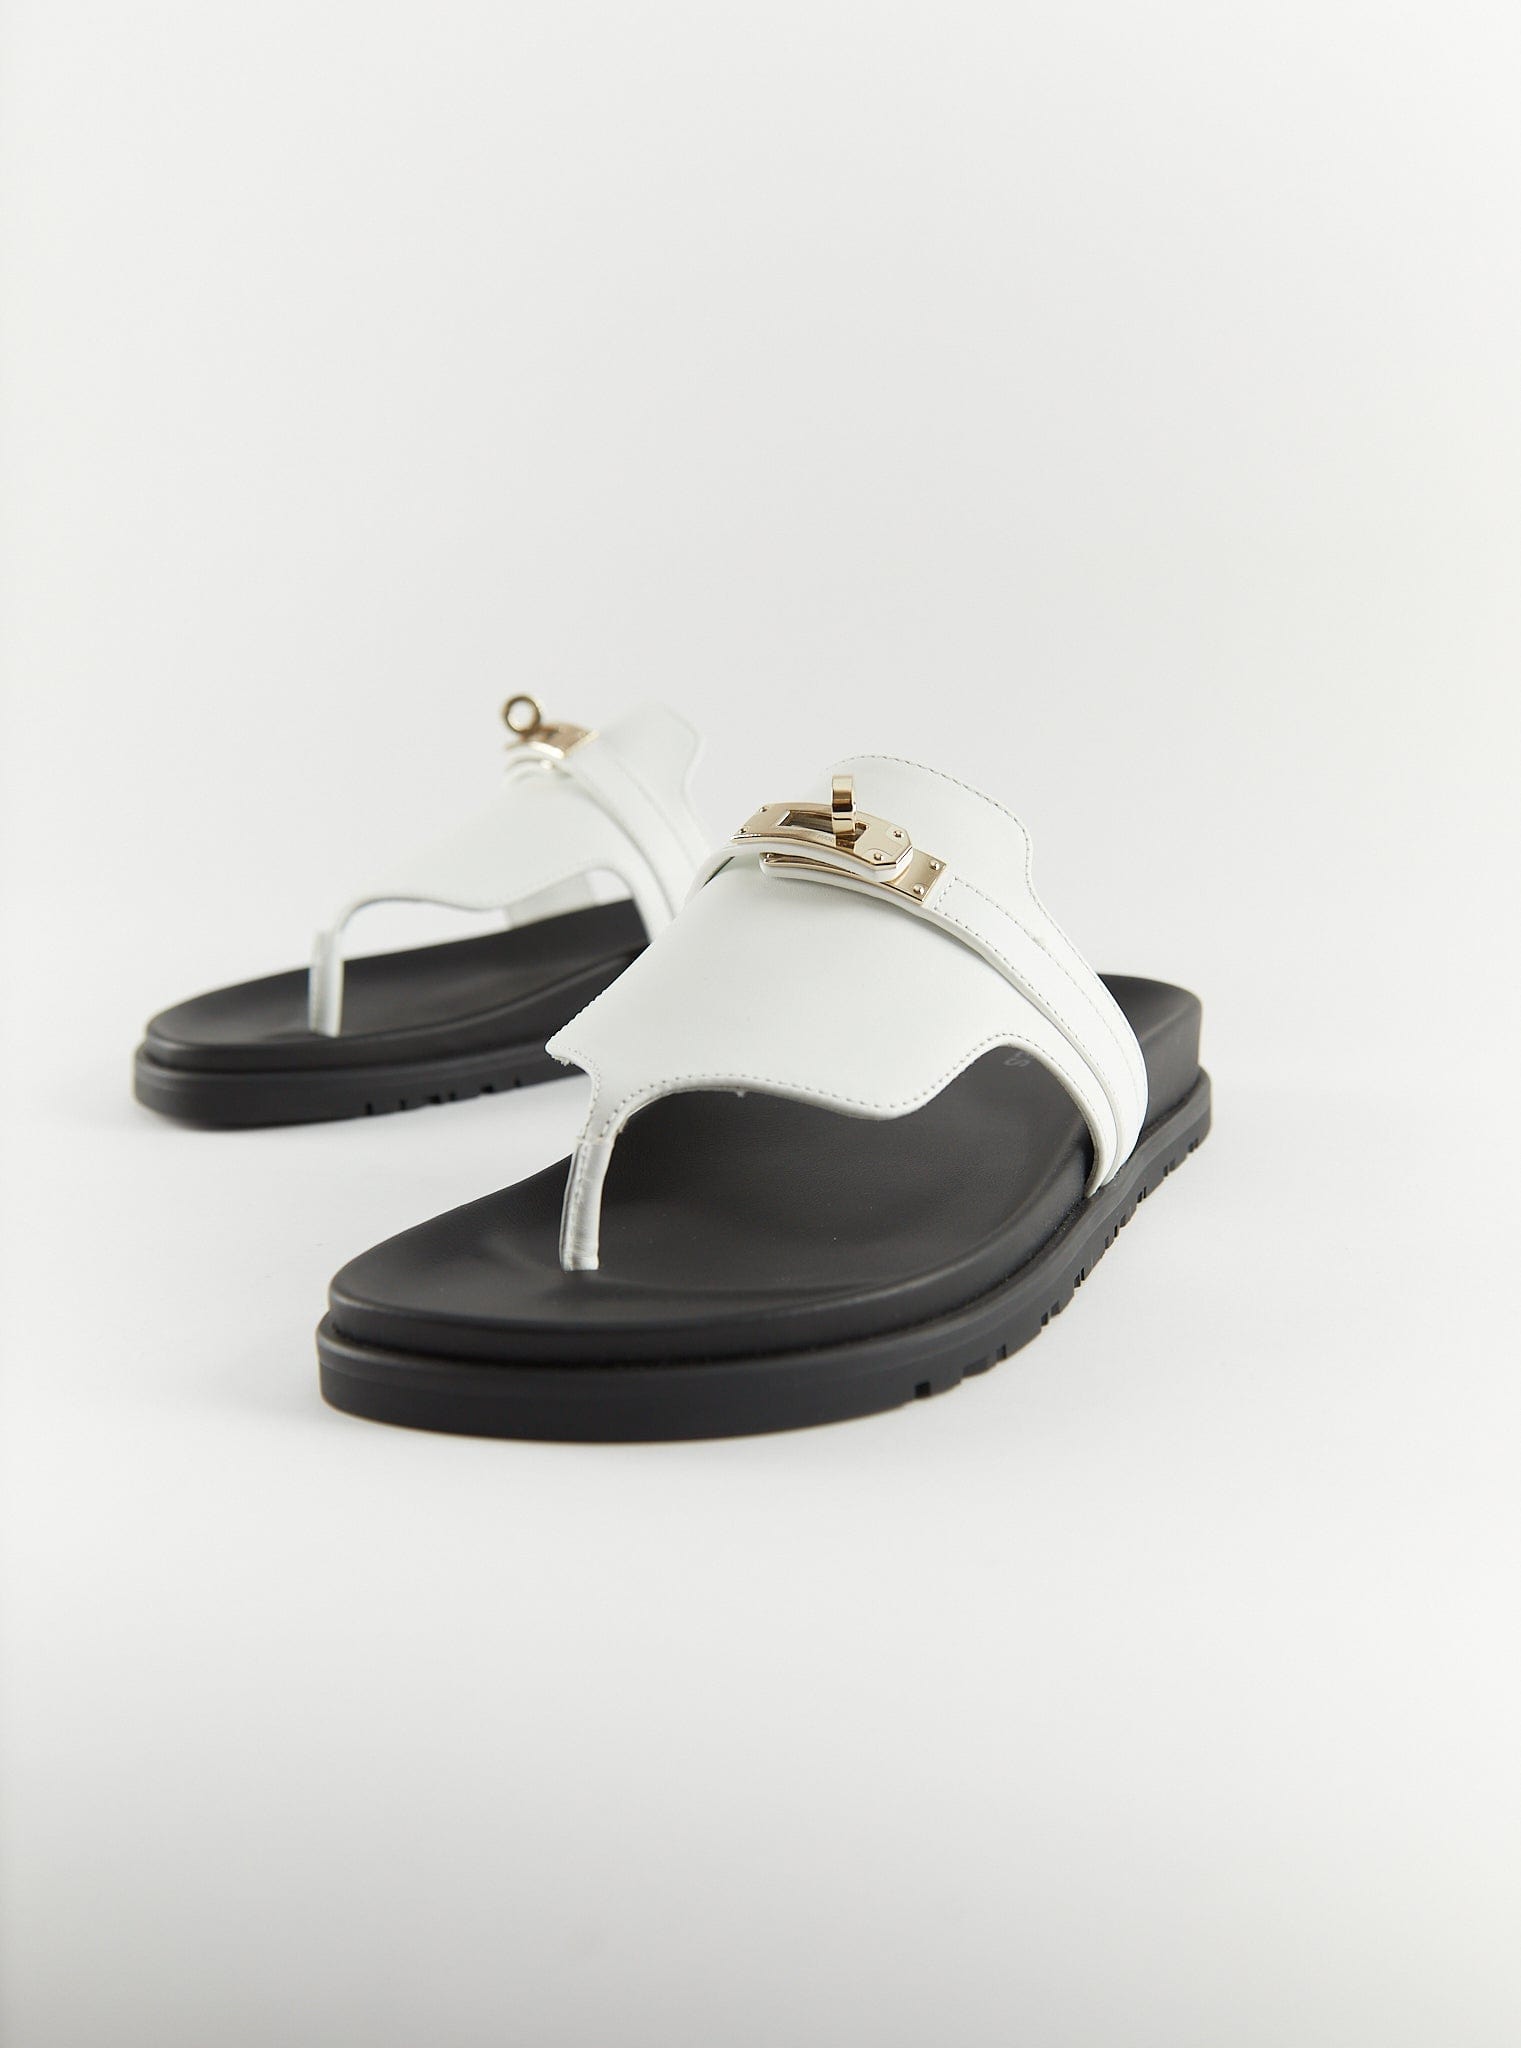 Hermès HERMÈS EMPIRE SANDALS White with Permabrass Hardware - Size 37